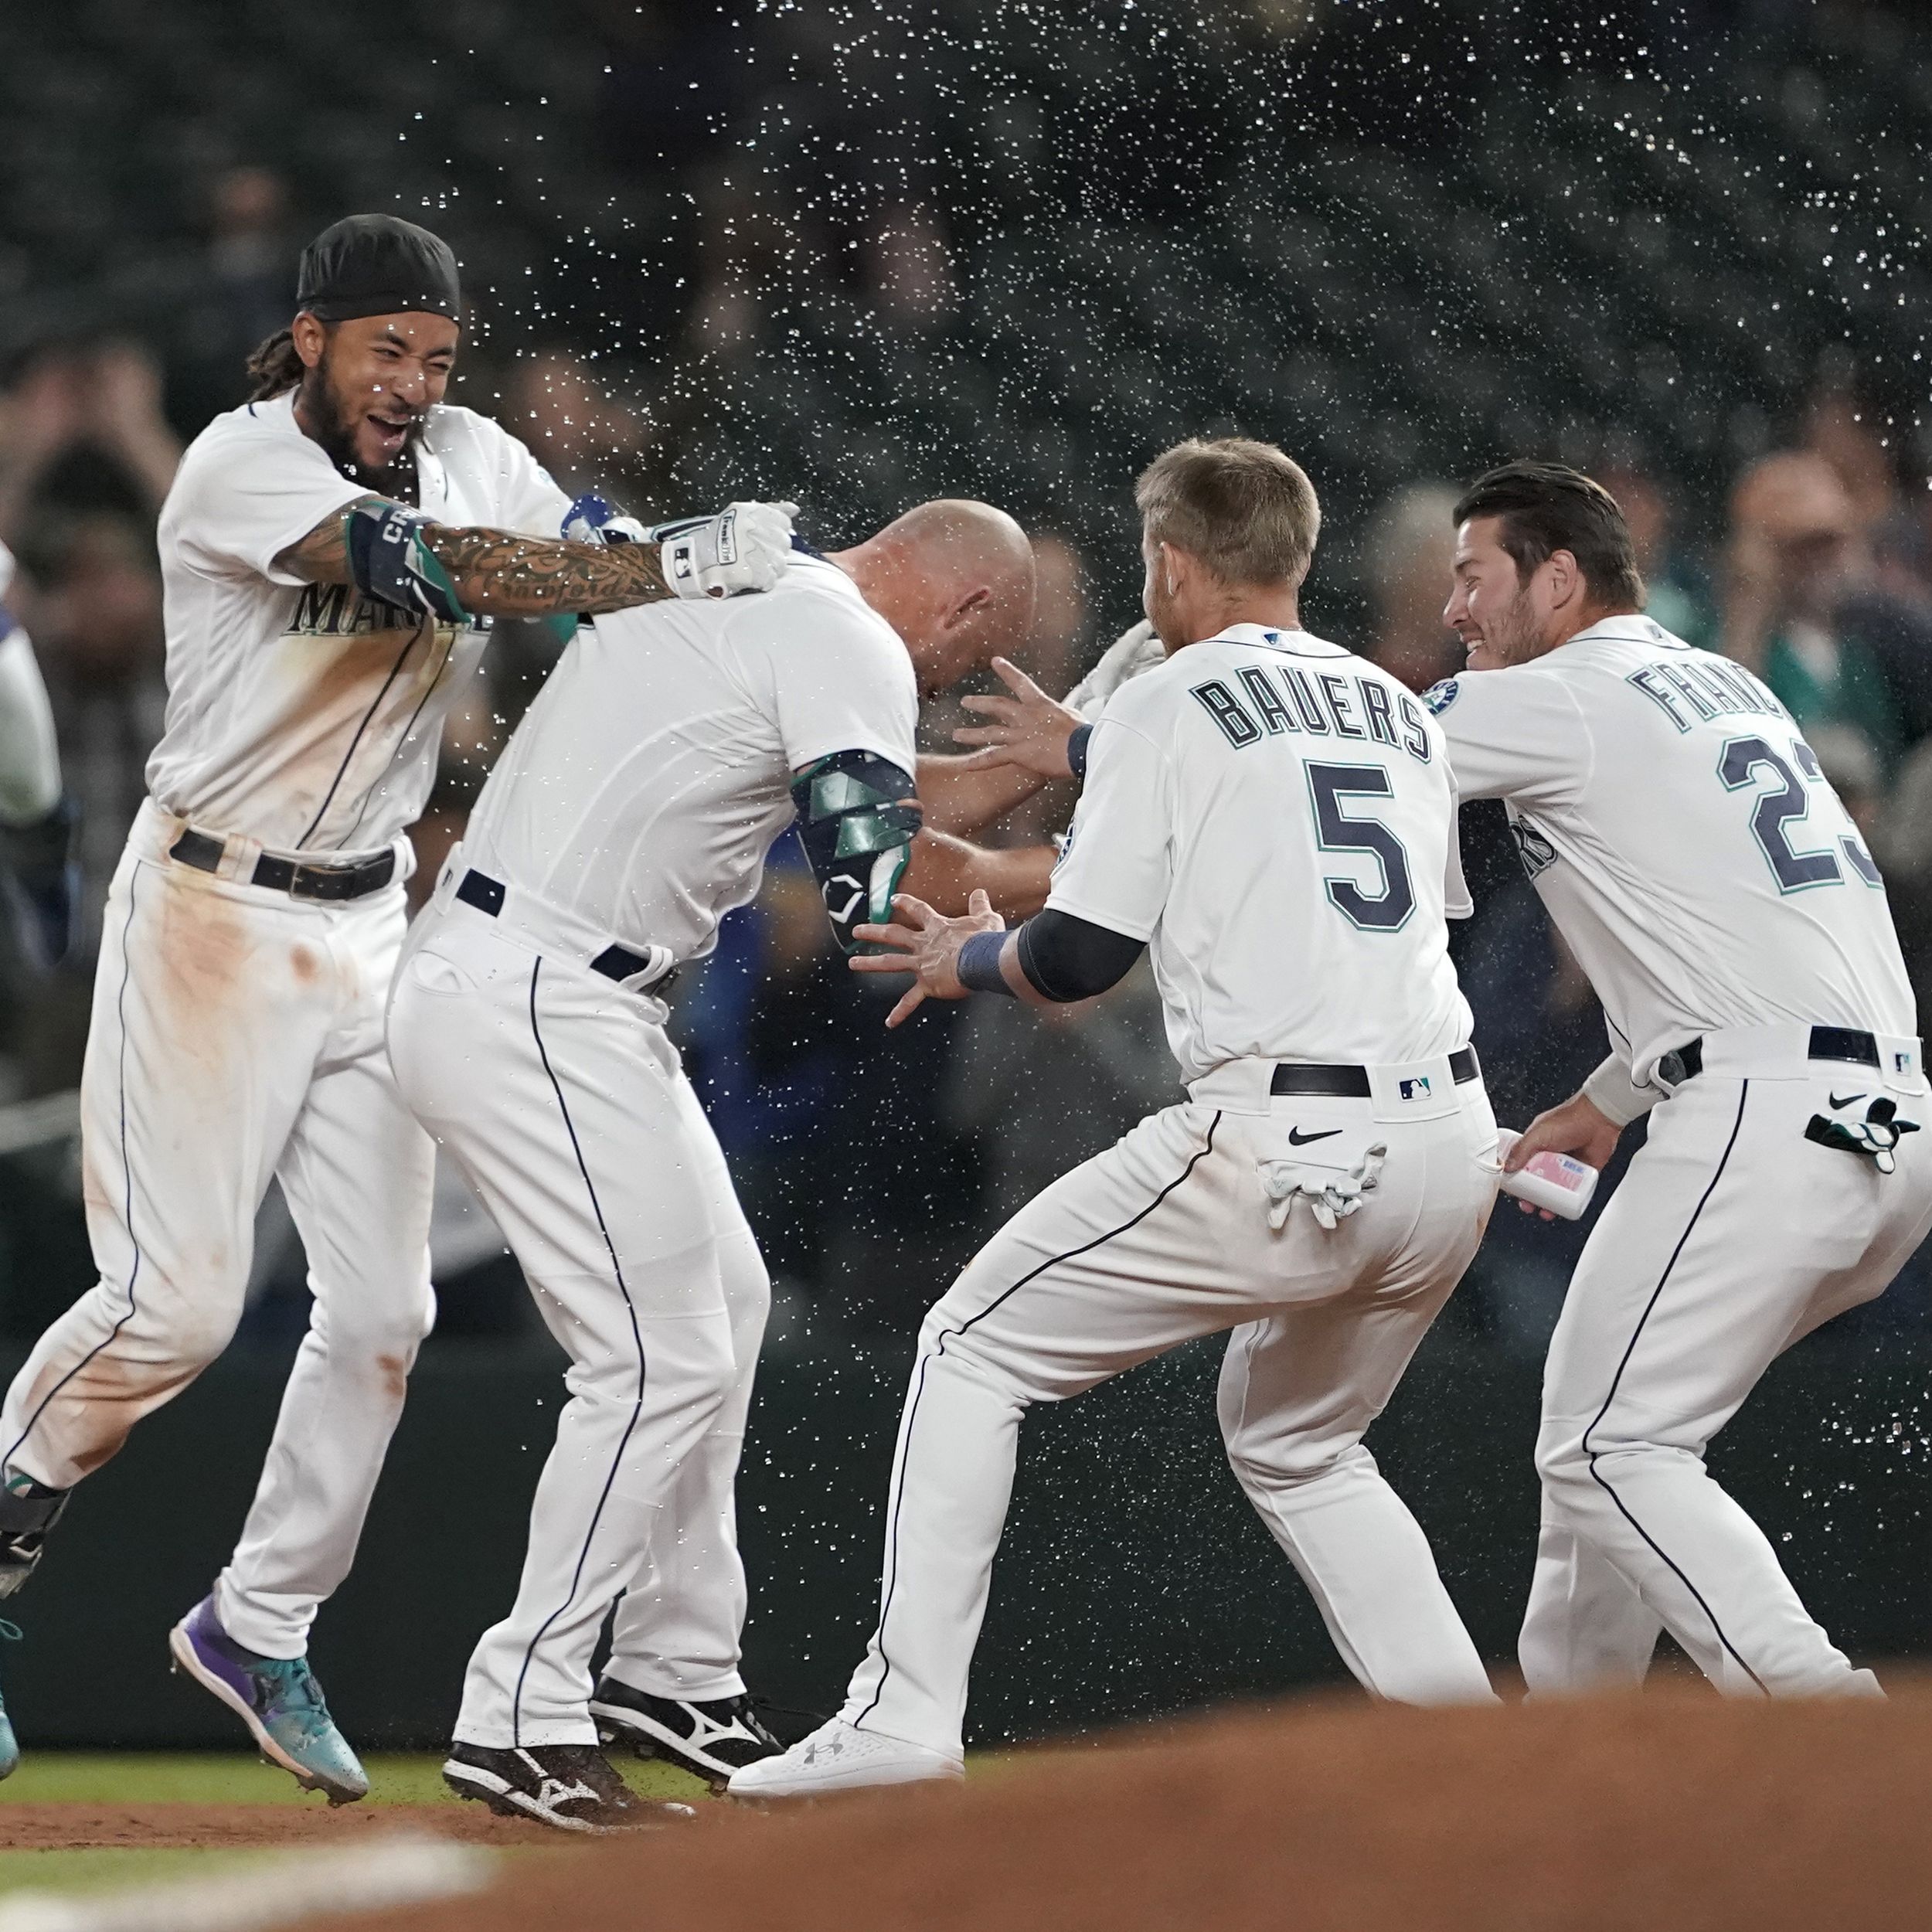 Kyle Seager lets the Mariners walk off the field winners against Rays